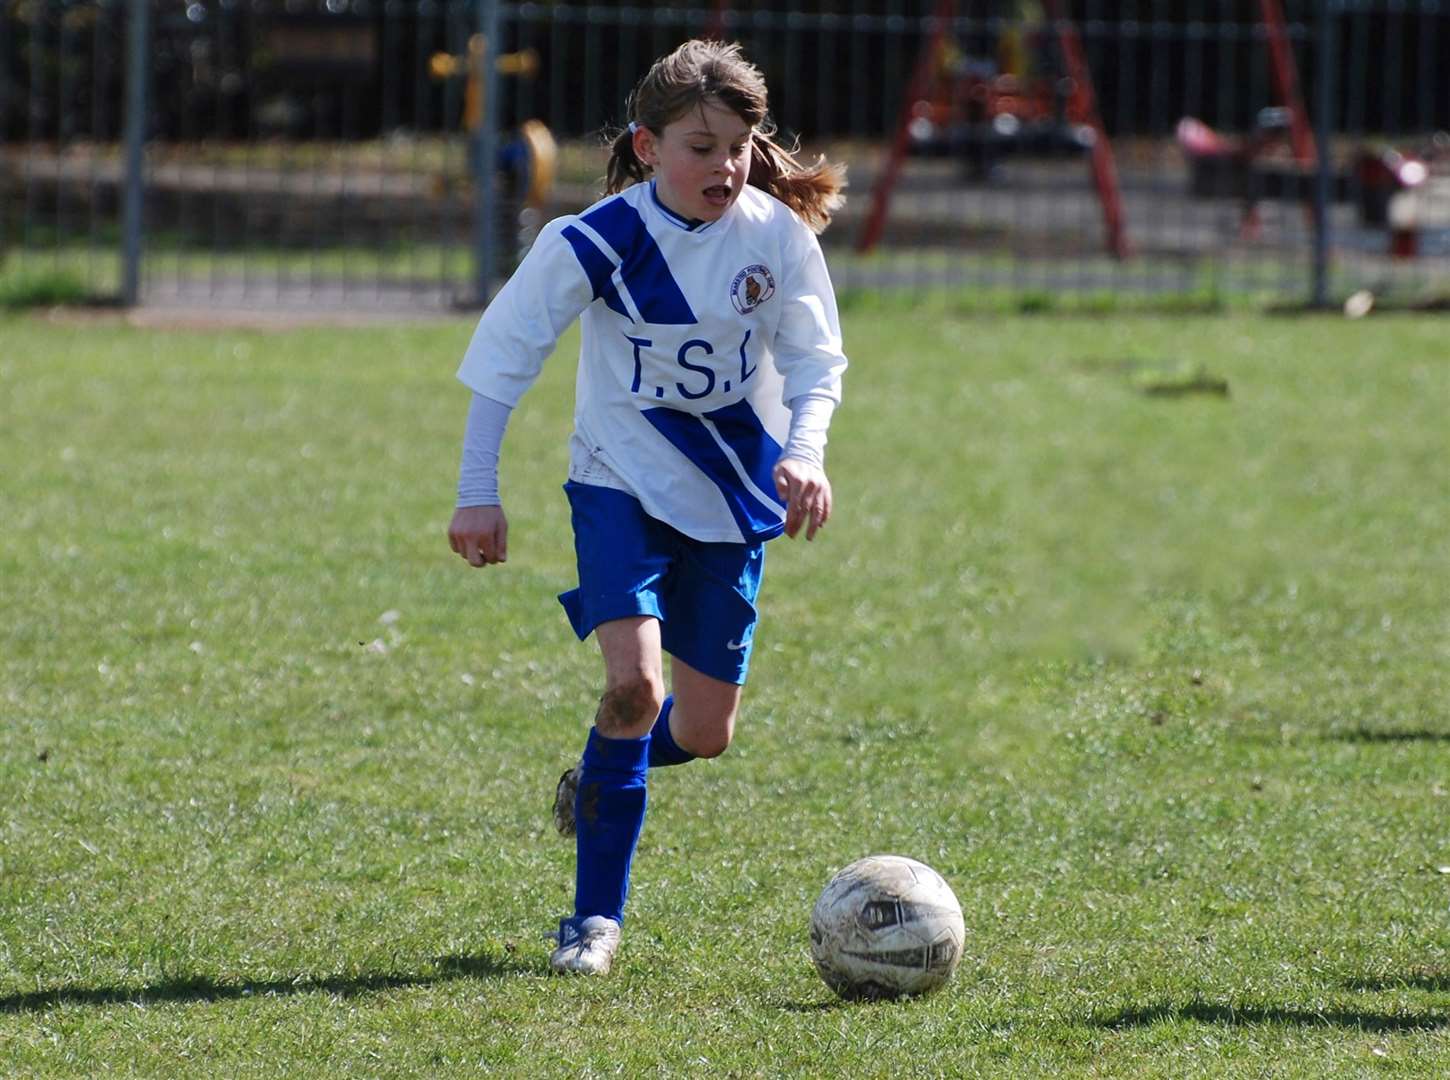 A young Alessia Russo playing for Bearsted boys